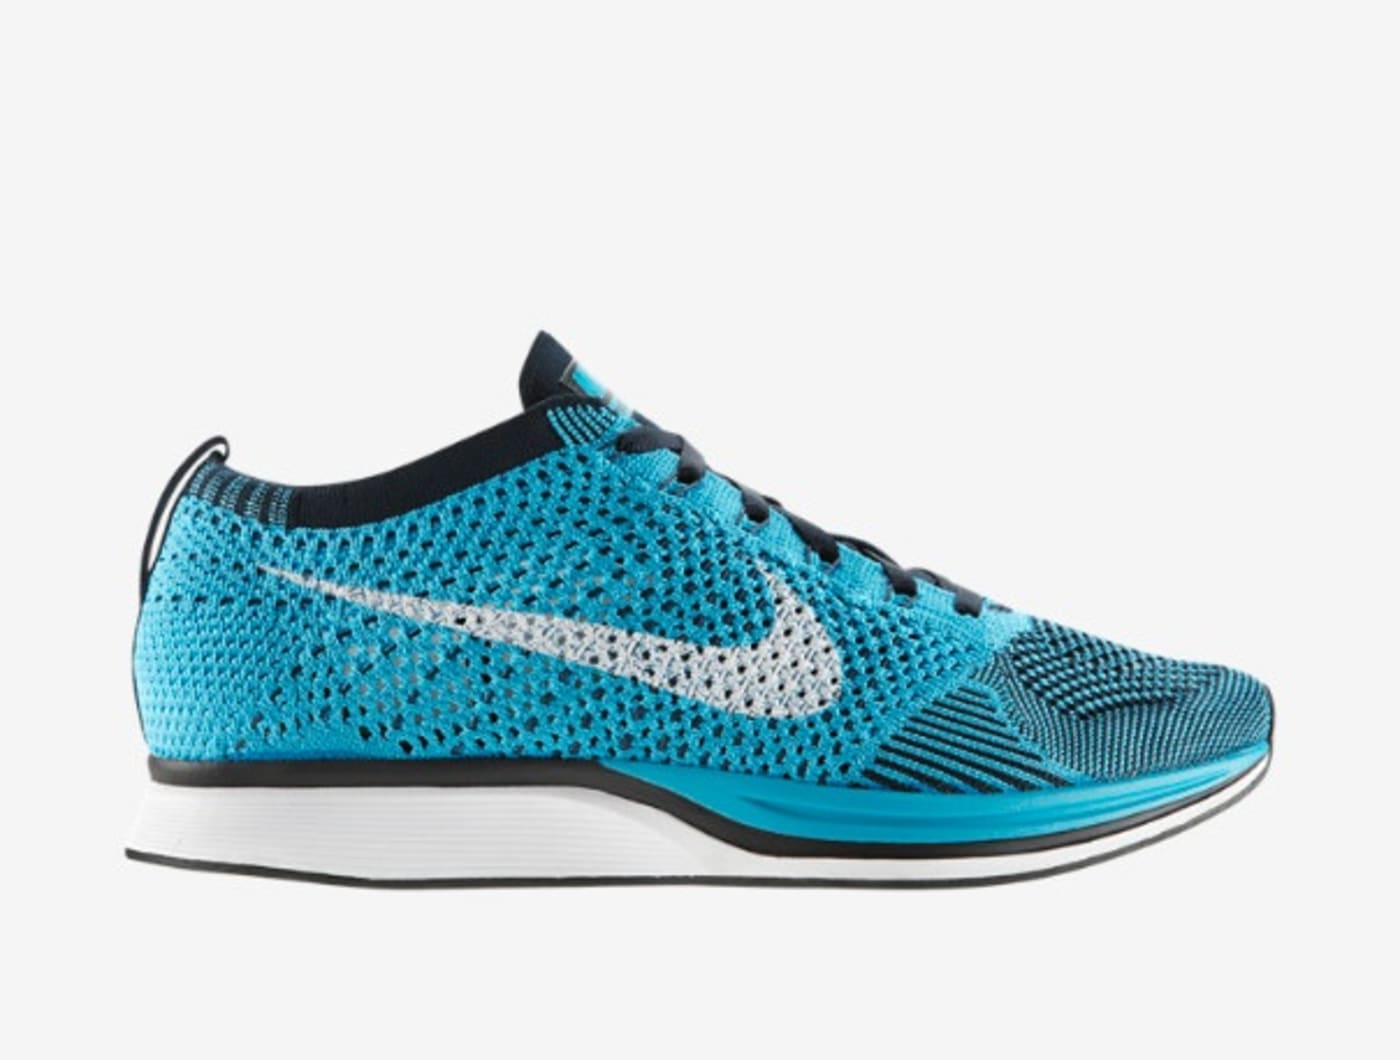 Kicks of the Day: Nike Flyknit Racer “Chlorine Blue” | Complex